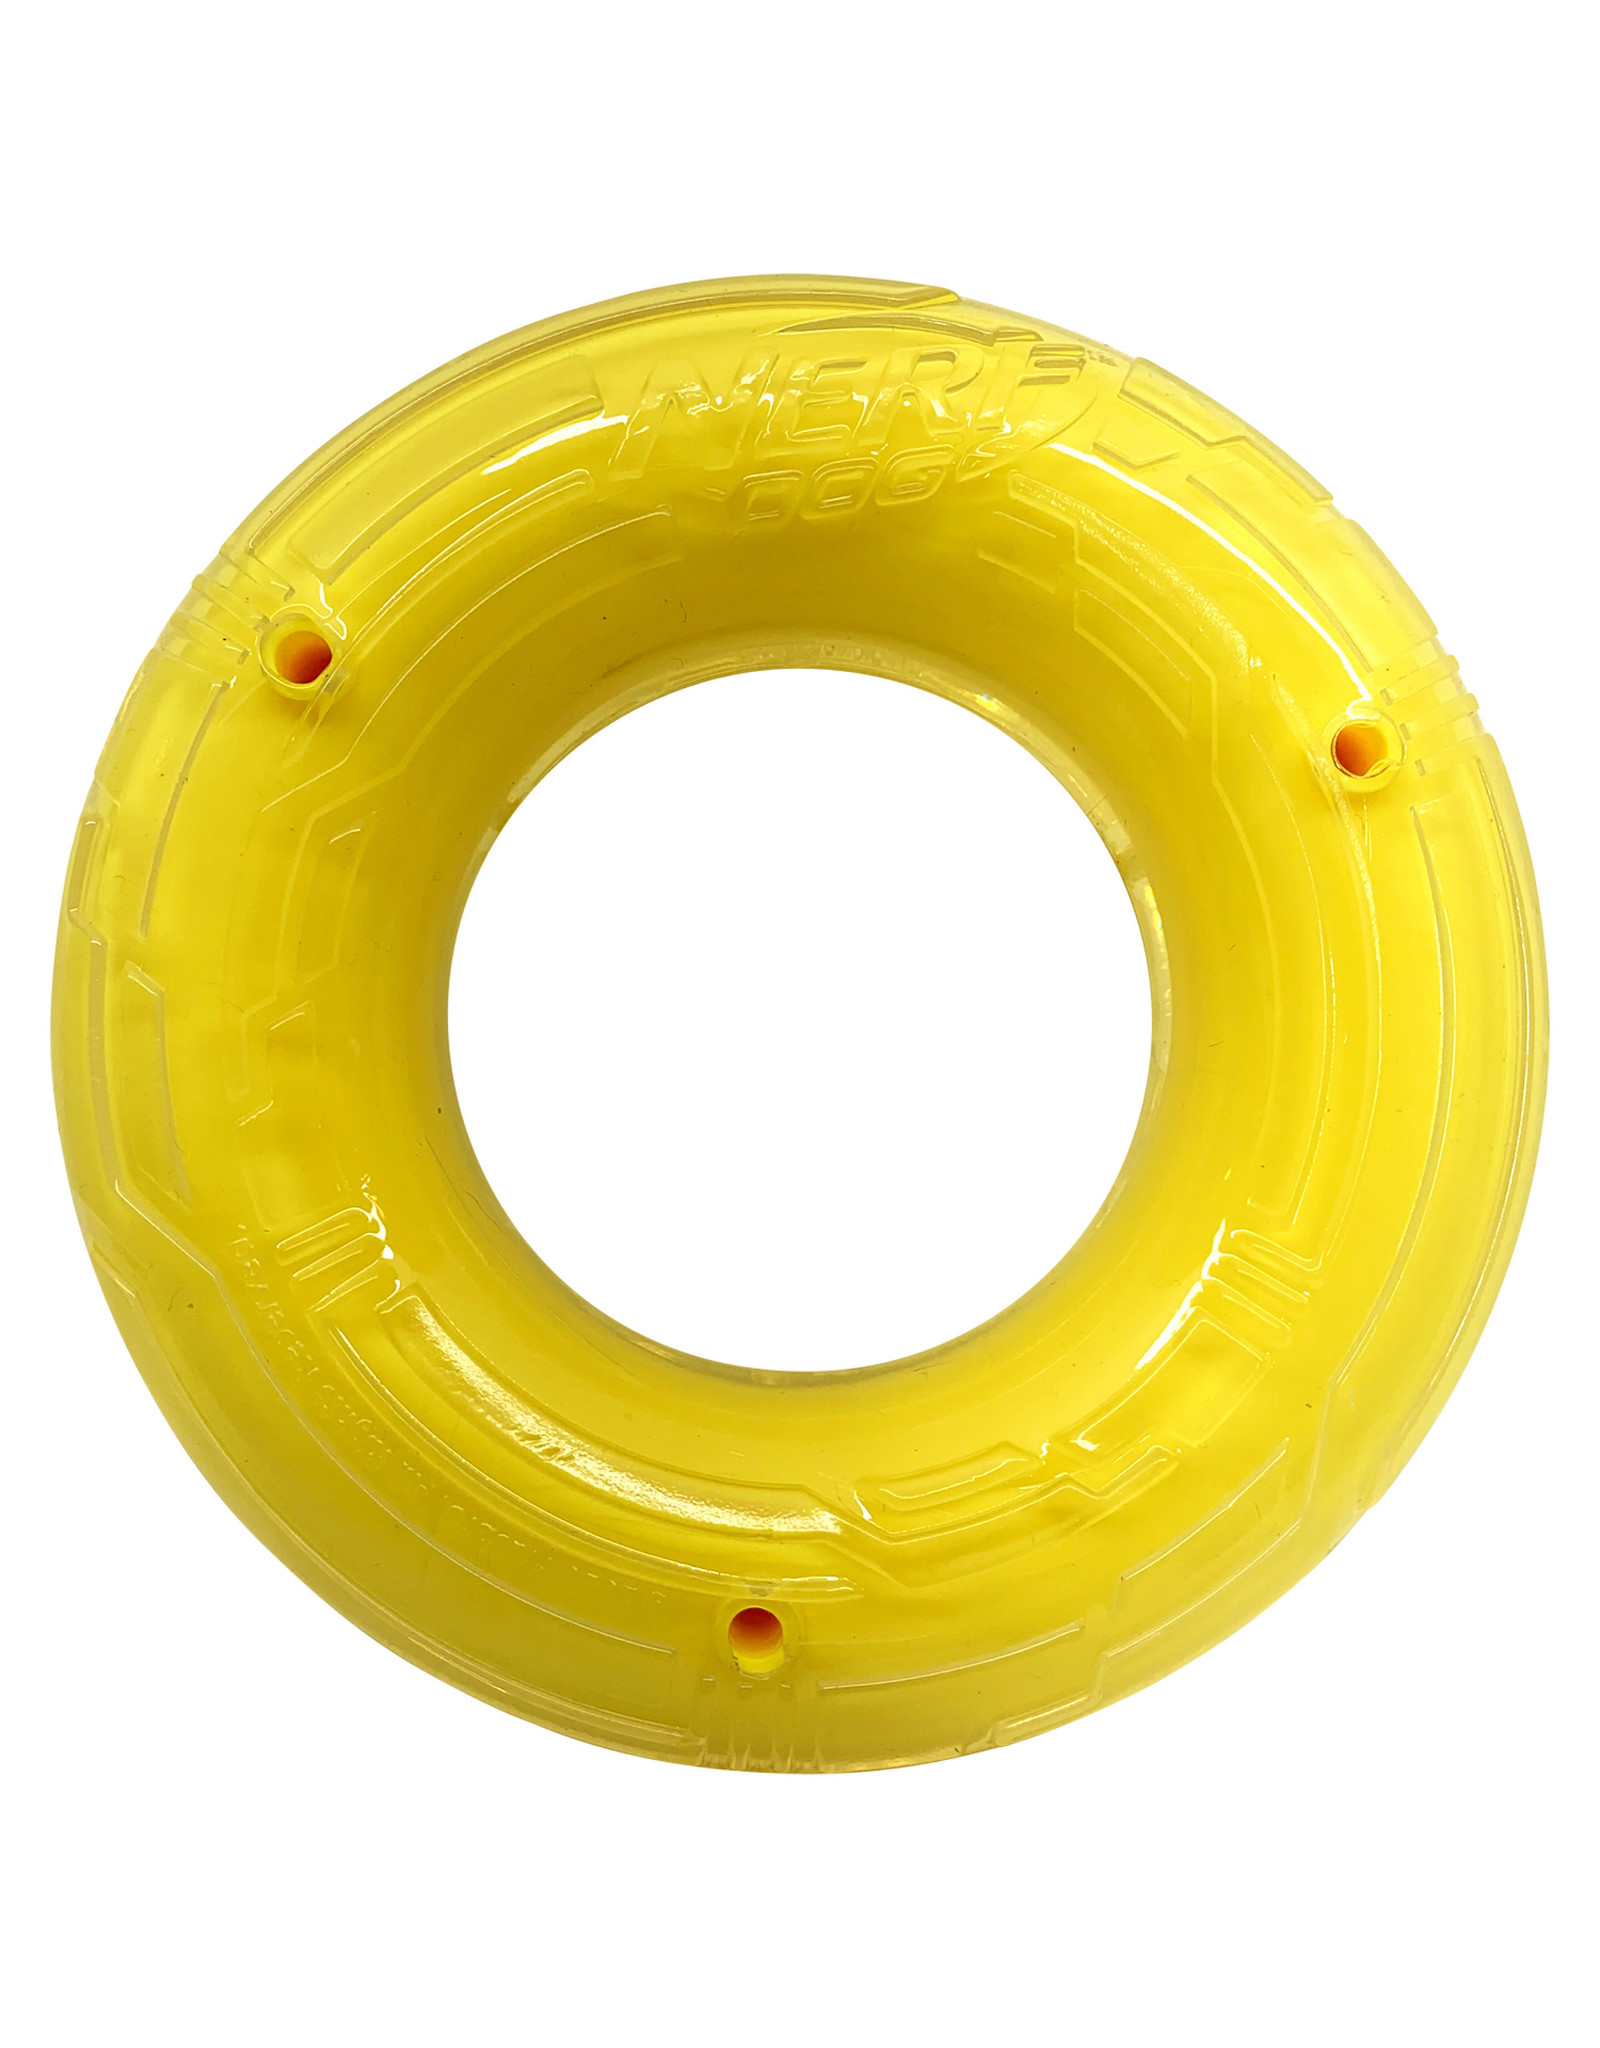 Nerf Nerf Dog Scentology Large Ring  Chicken Scent 15cm (6in)